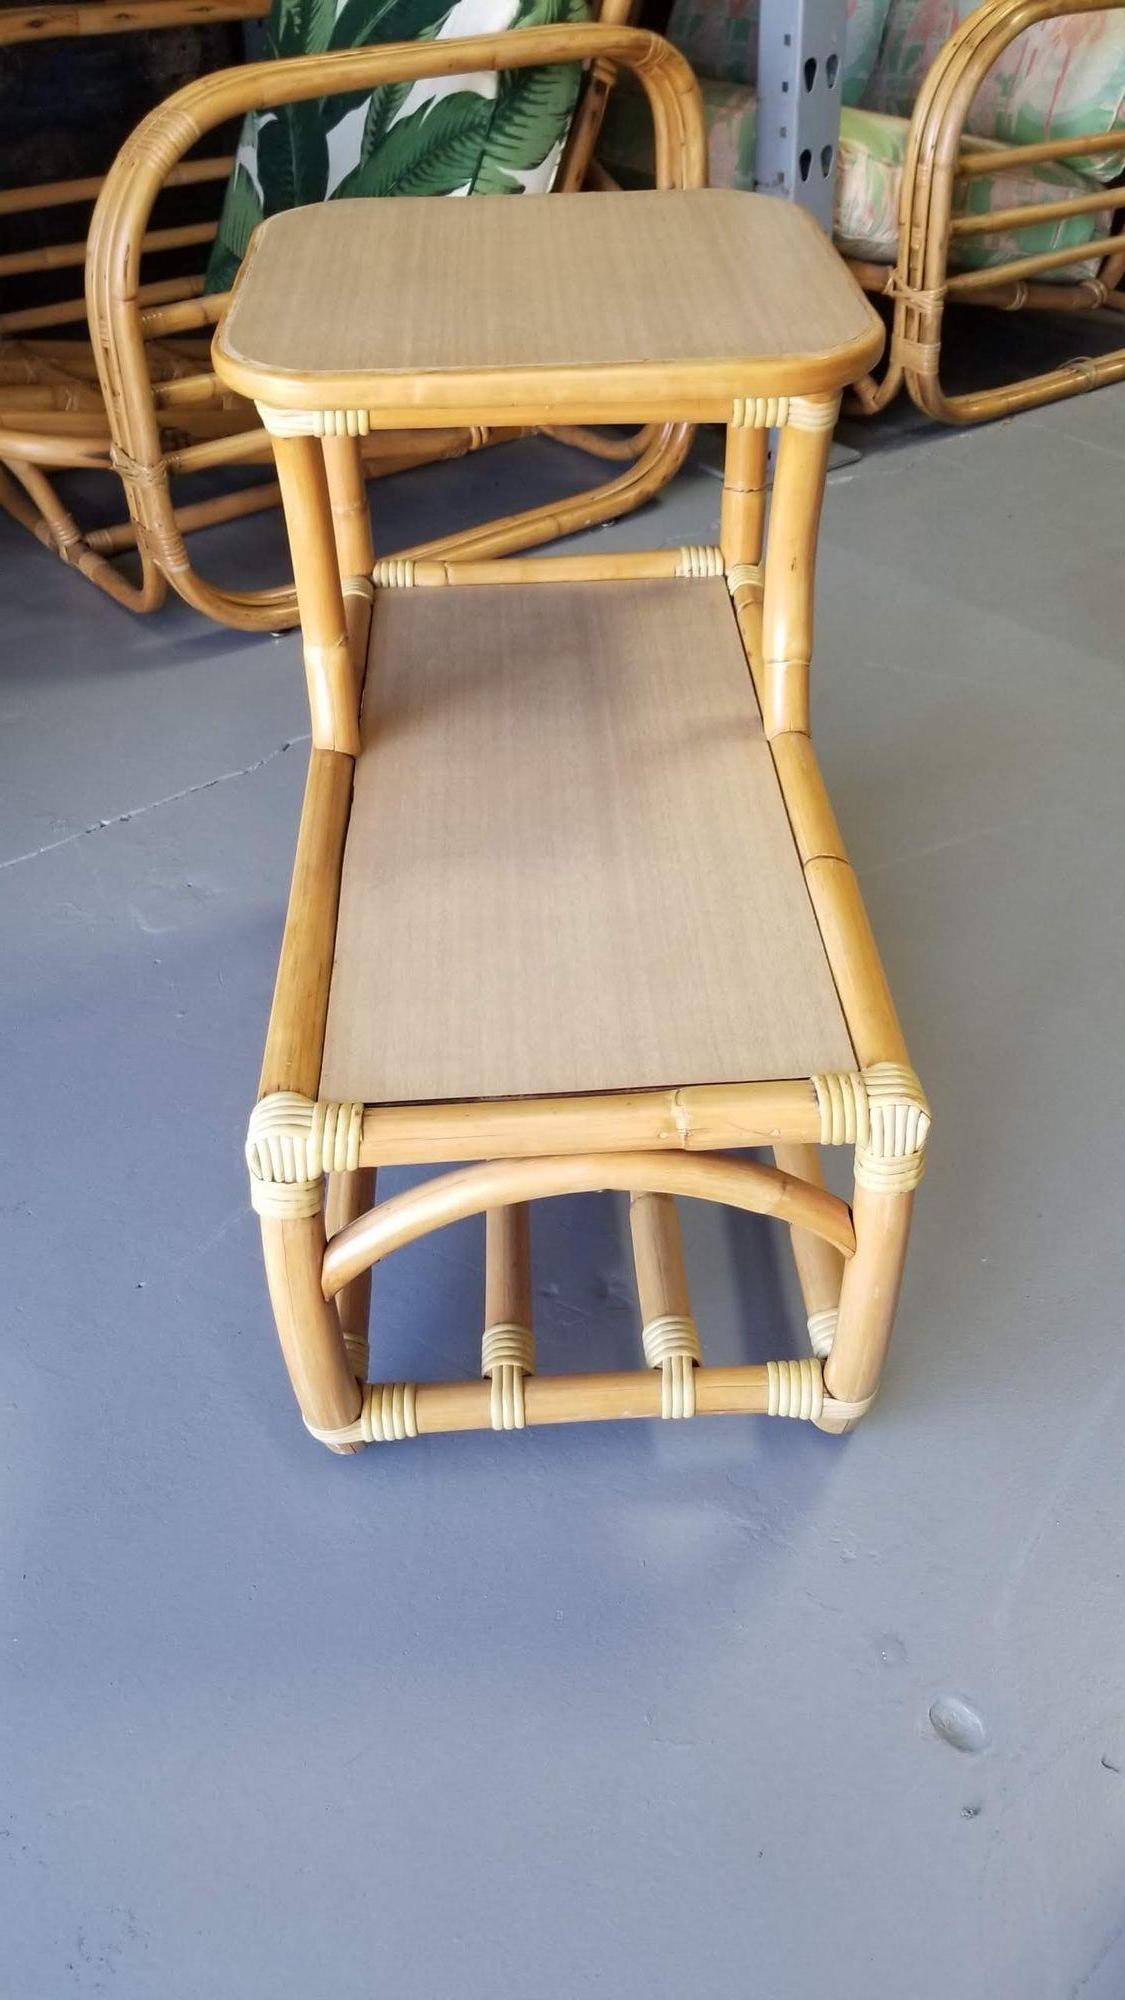 Restored Rattan Side Table 2-Tier w/ Formica Top, Set of 2 In Excellent Condition For Sale In Van Nuys, CA